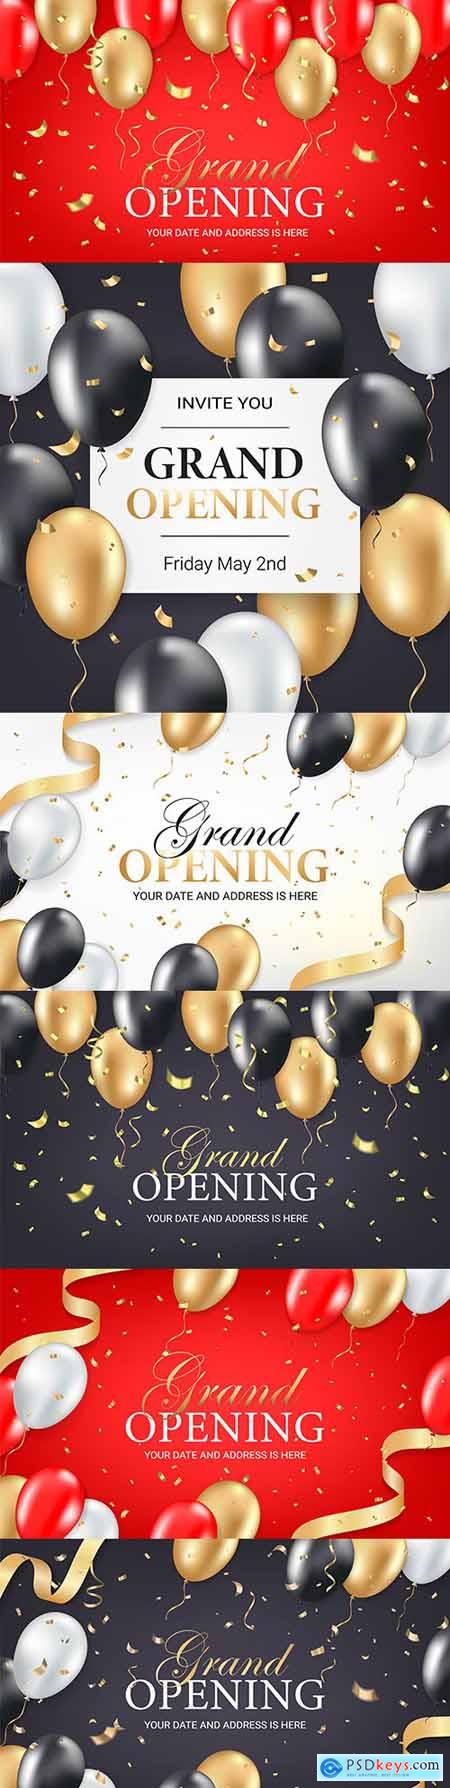 Grand opening design invitation ticket with balls